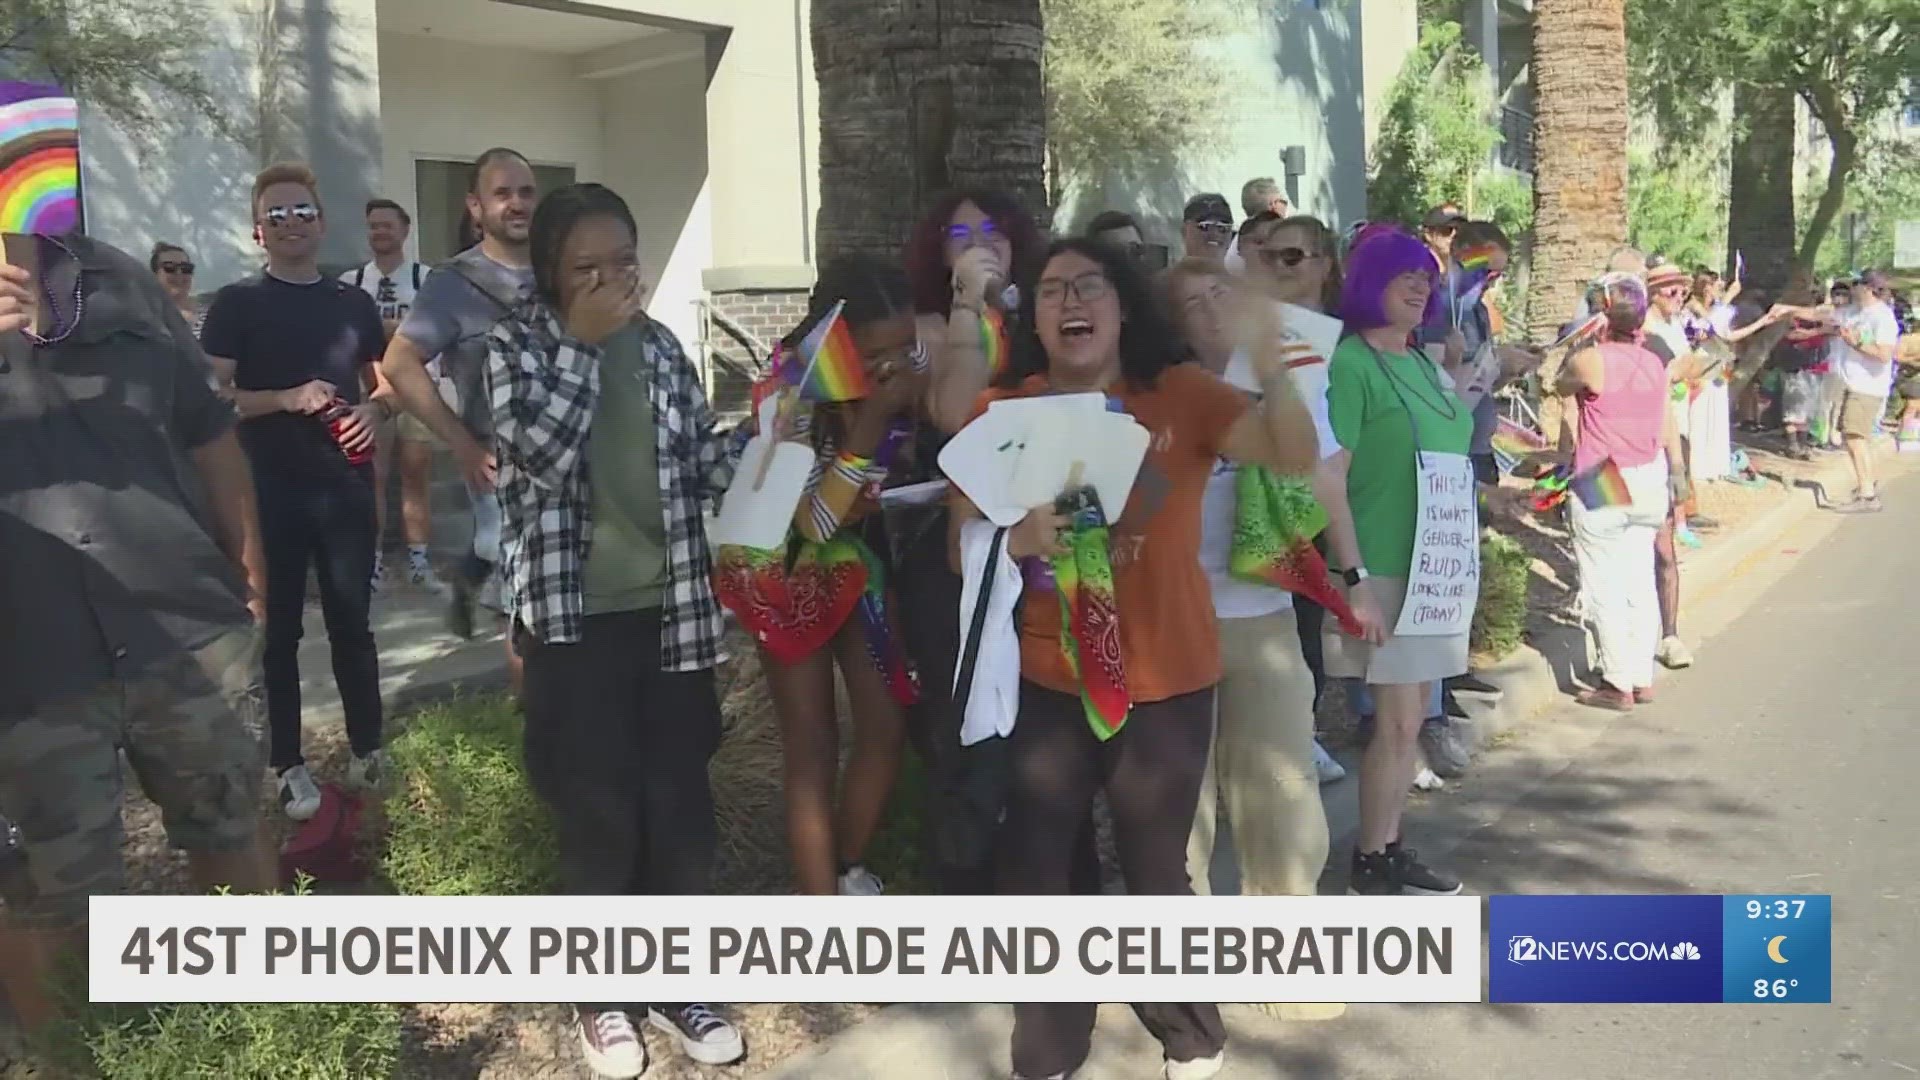 Around 2,000 people came to participate in the 2023 Phoenix Pride Parade while thousands more came to watch, dressing up, waving flags, fans, and balloons.